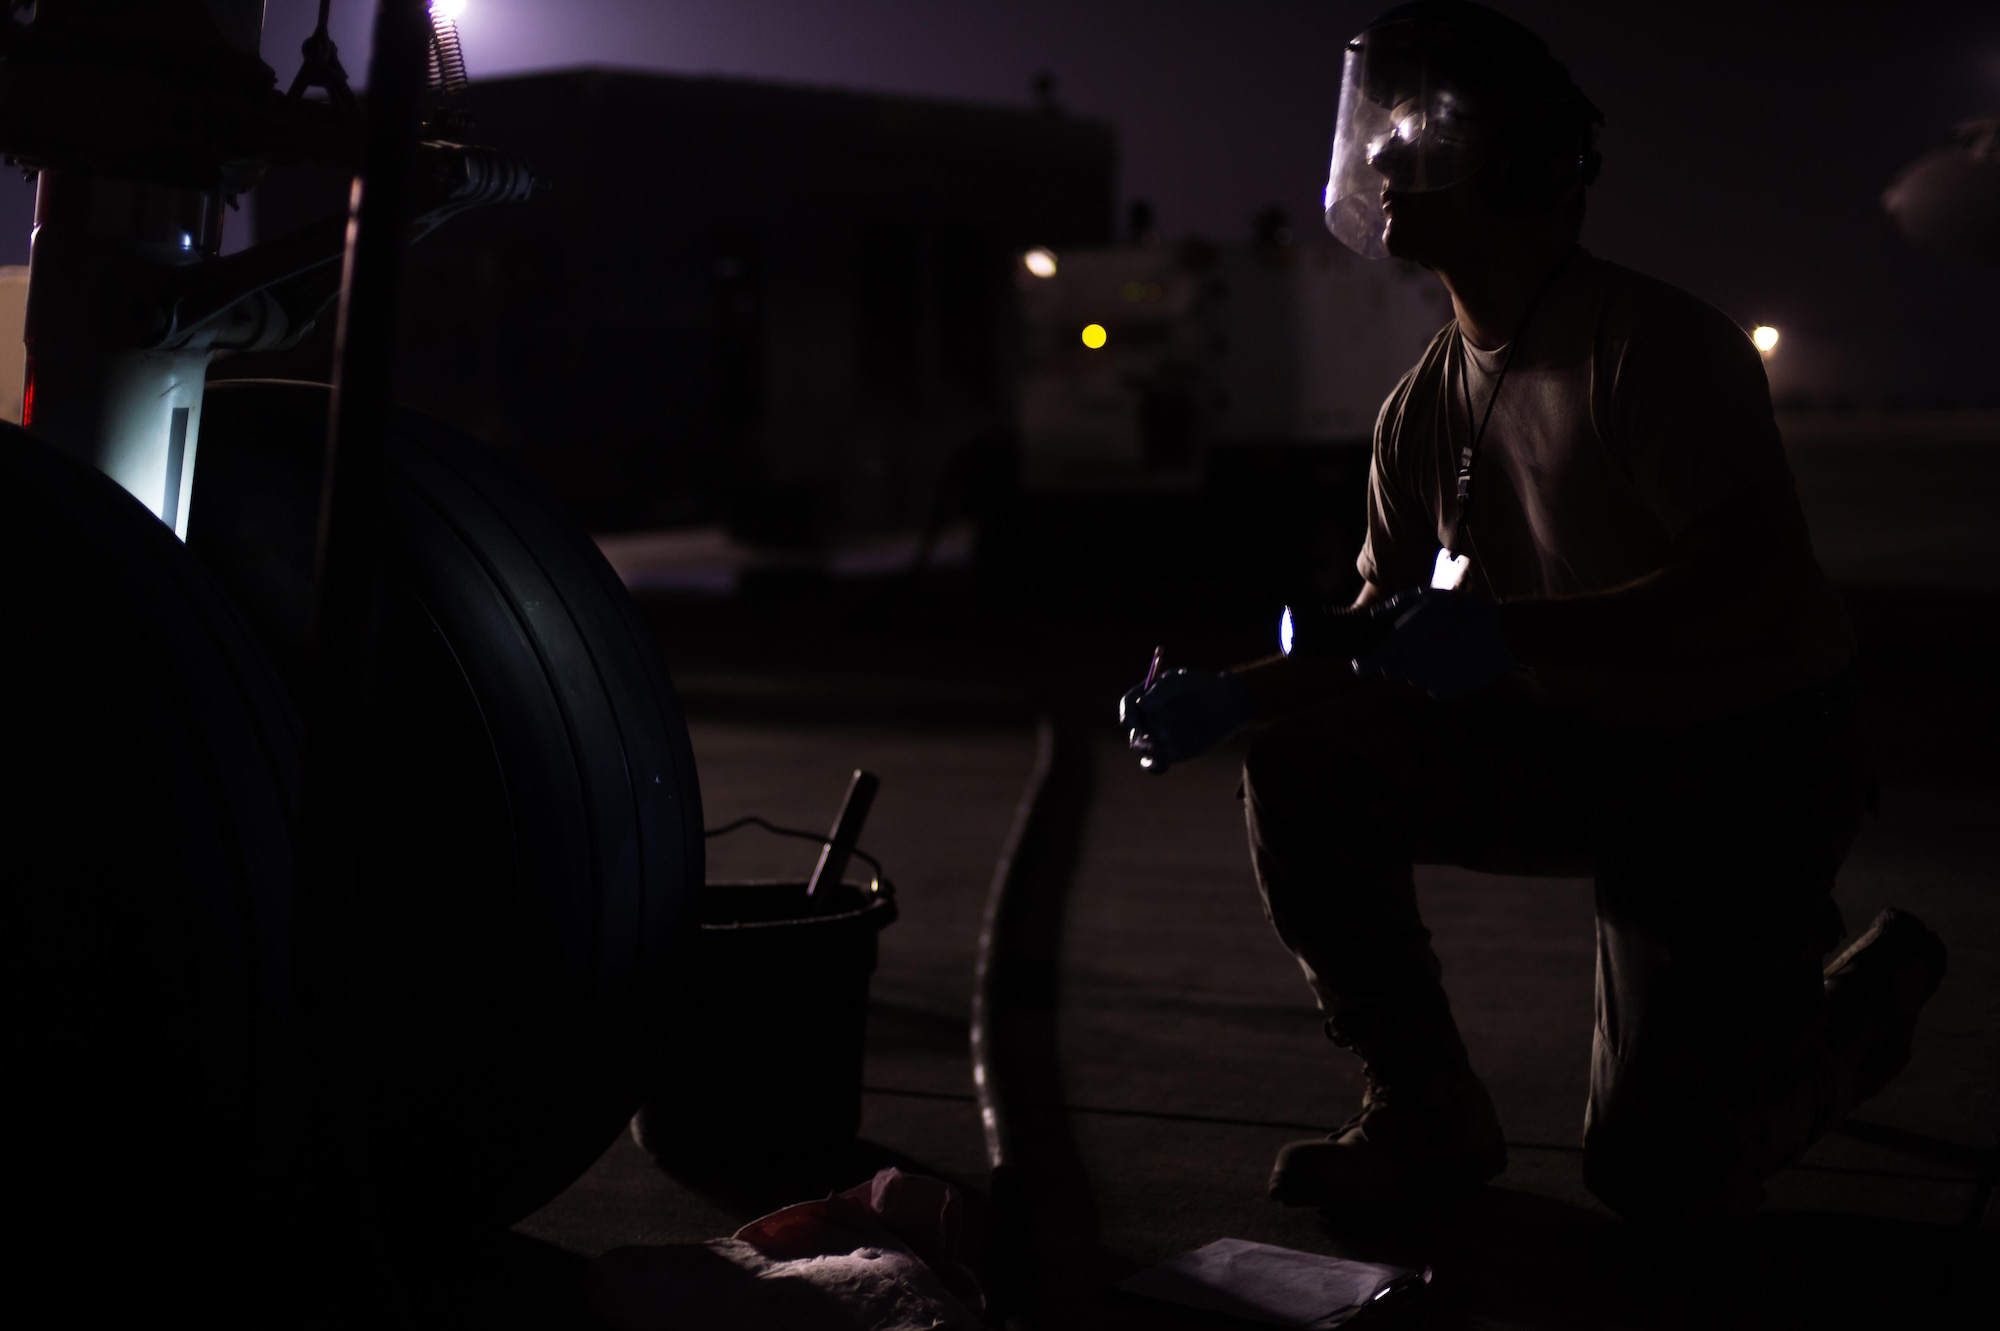 Airman 1st Class Richard, a KC-10 Extender fuel systems specialist, completes a fuels system inspection at an undisclosed location in Southwest Asia, Oct. 26, 2016. The KC-10s are providing refueling support to several coalition airframes working to liberate the city of Mosul, Iraq. (U.S. Air Force photo by Senior Airman Tyler Woodward)